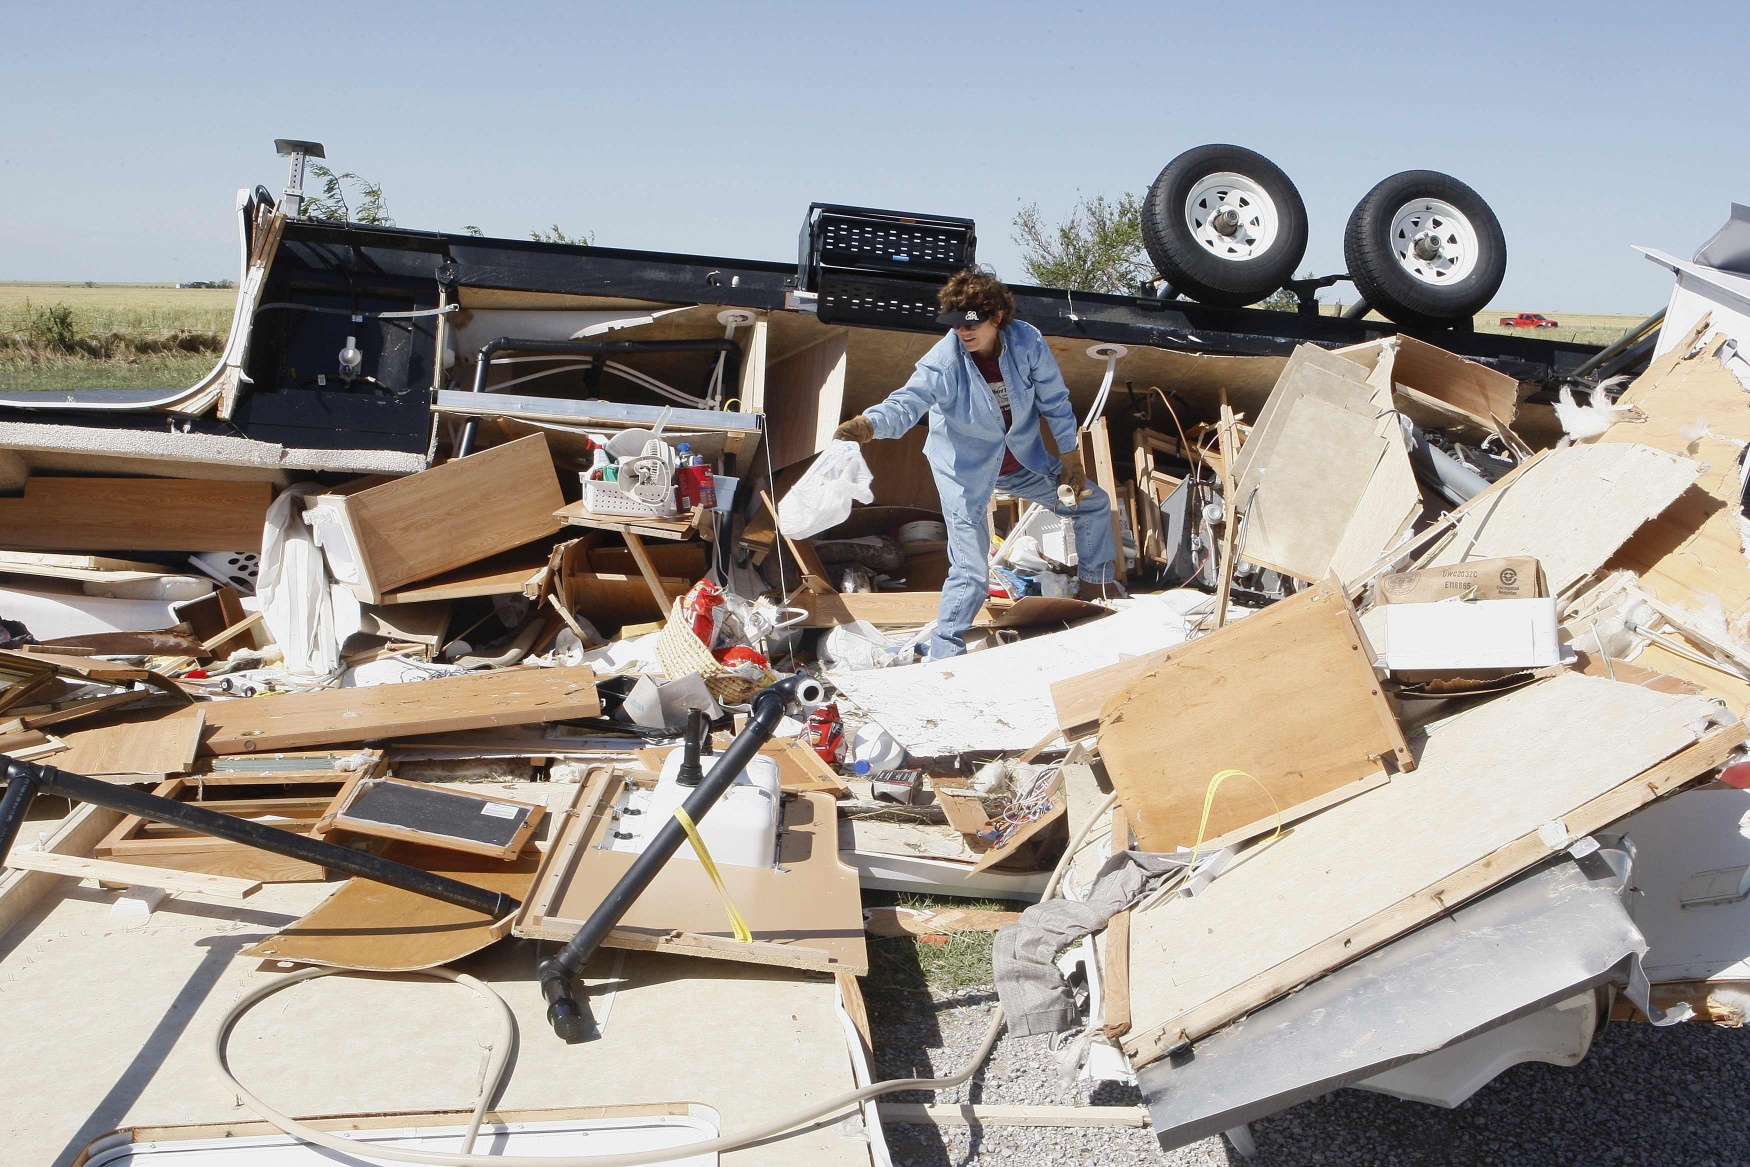 A woman collects her belongings which were destroyed by the tornado in El Reno in Oklahoma. The death toll from the tornadoes and severe flooding has now risen to 18. Photo: Reuters